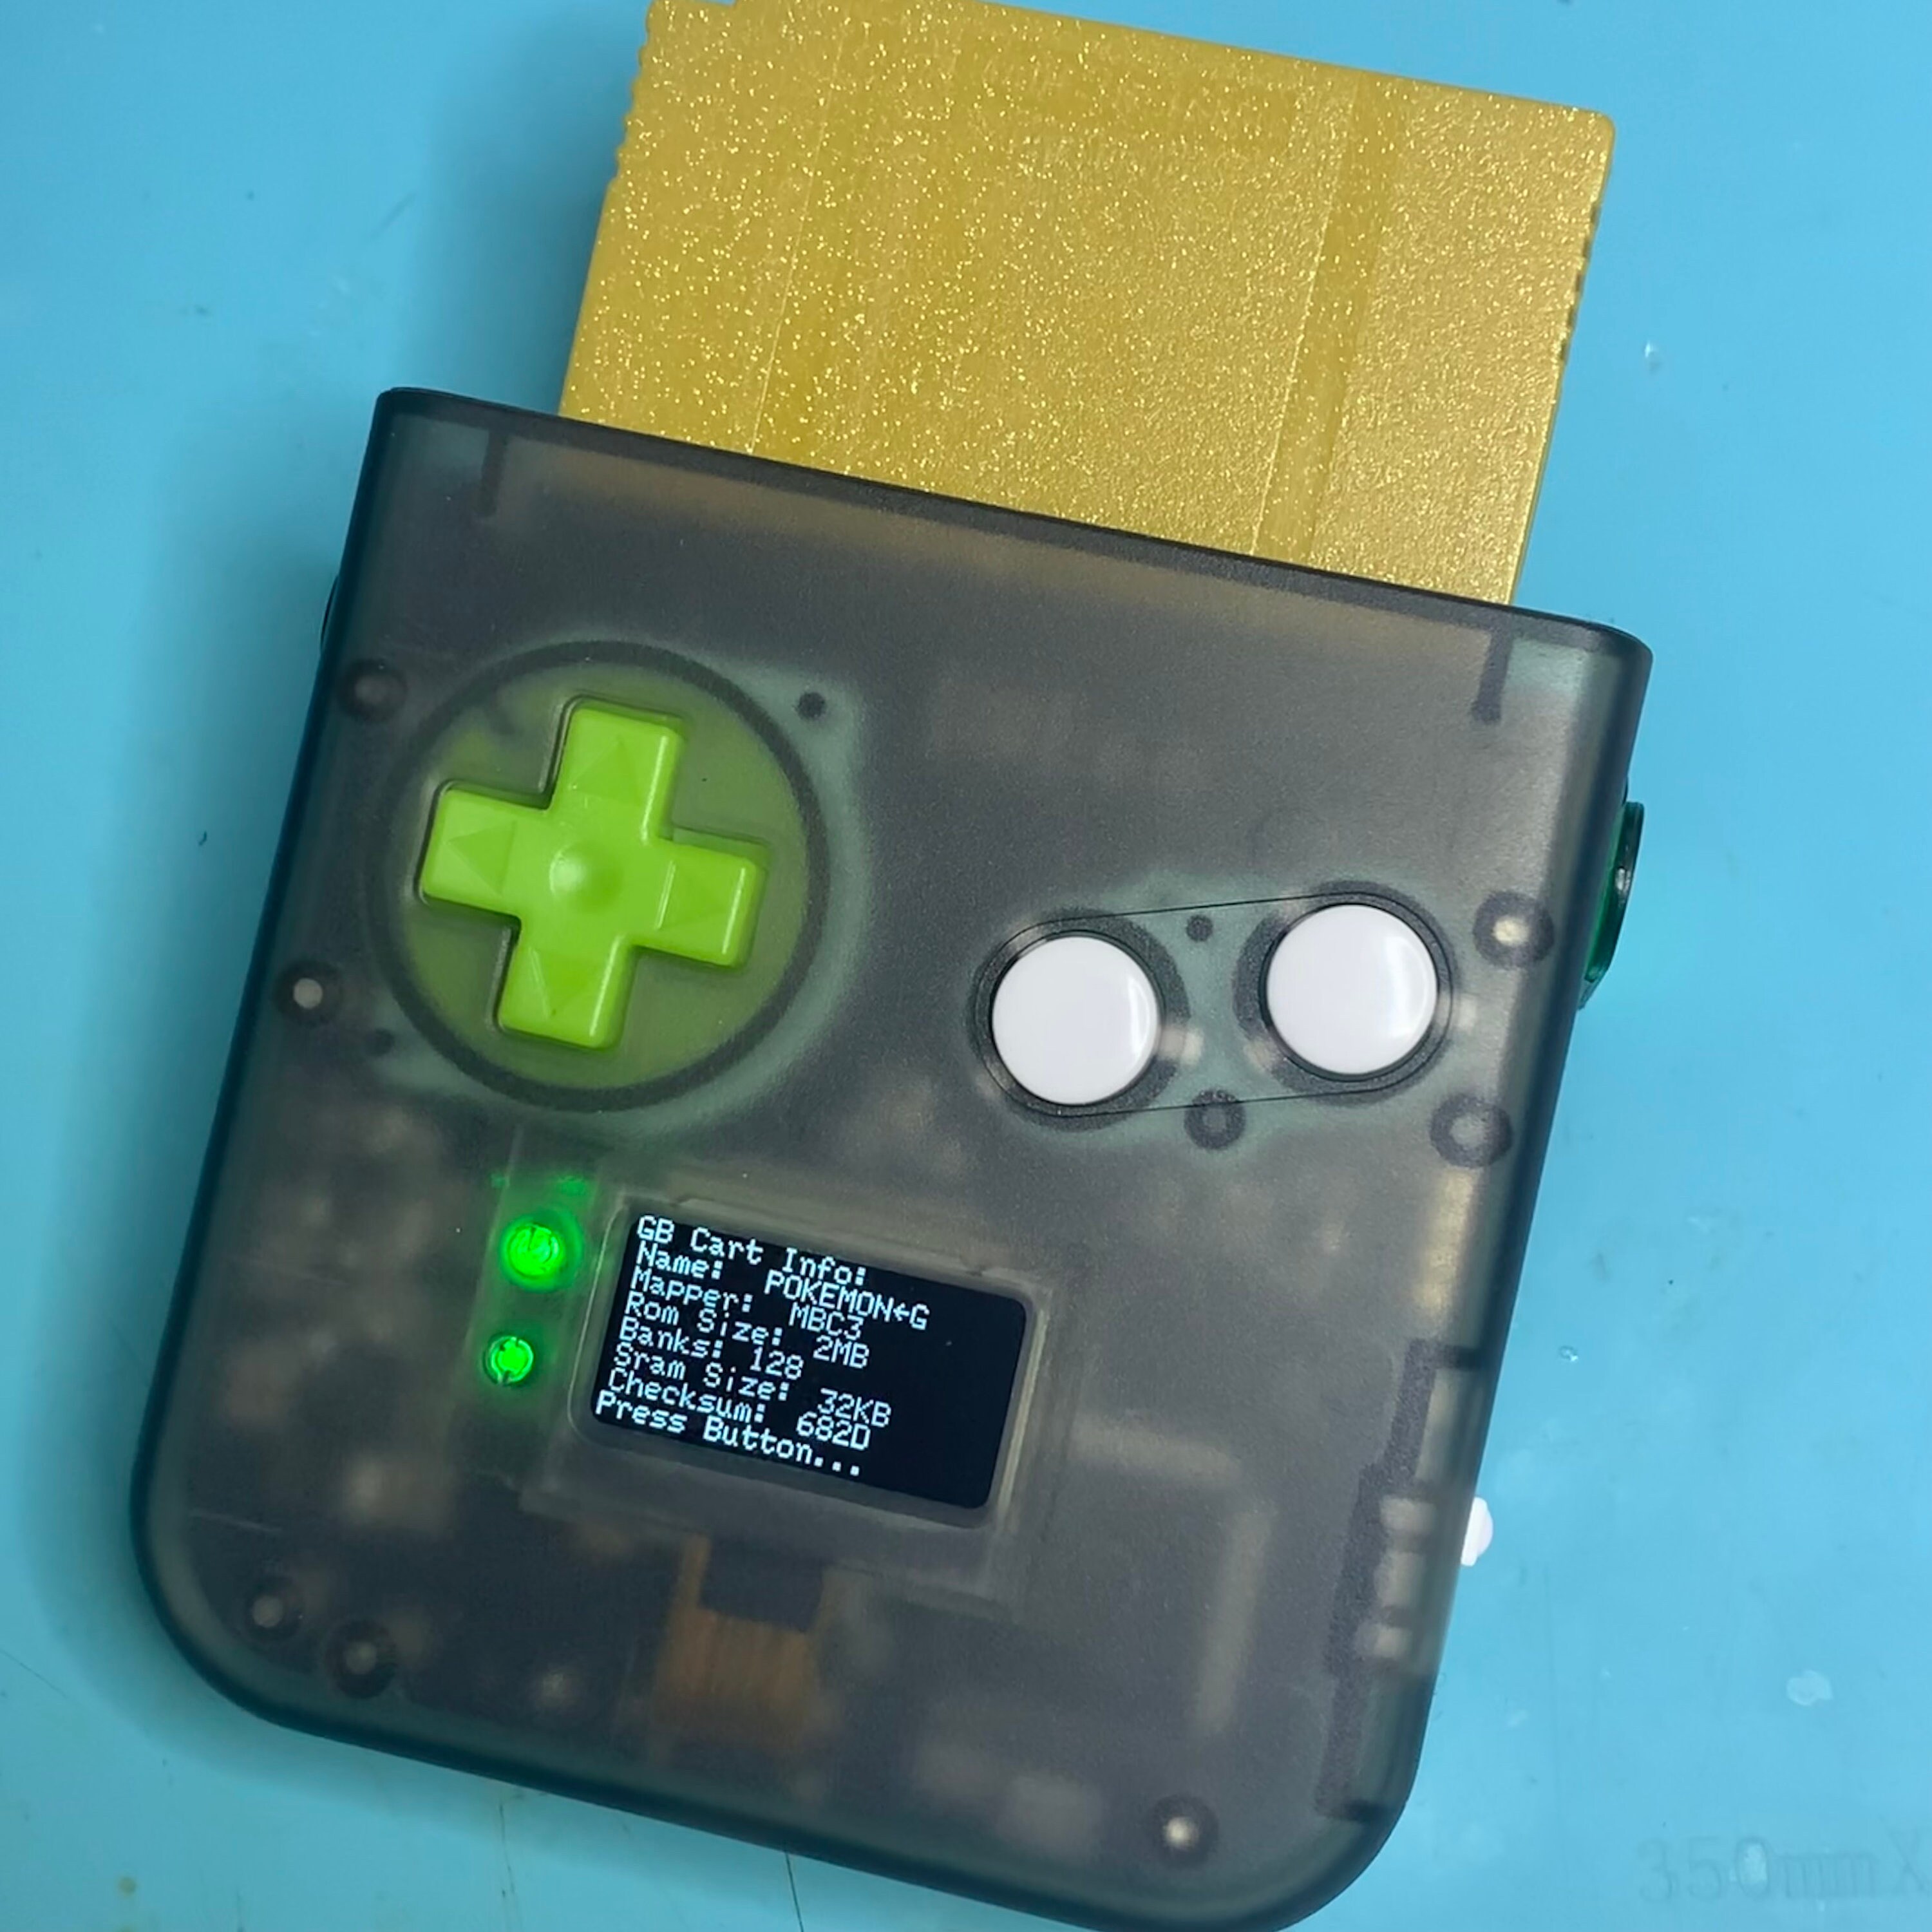 Gameboy Battery Replacement - CR2032 will fit in any GB/GBC/GBA cart : r/ Gameboy